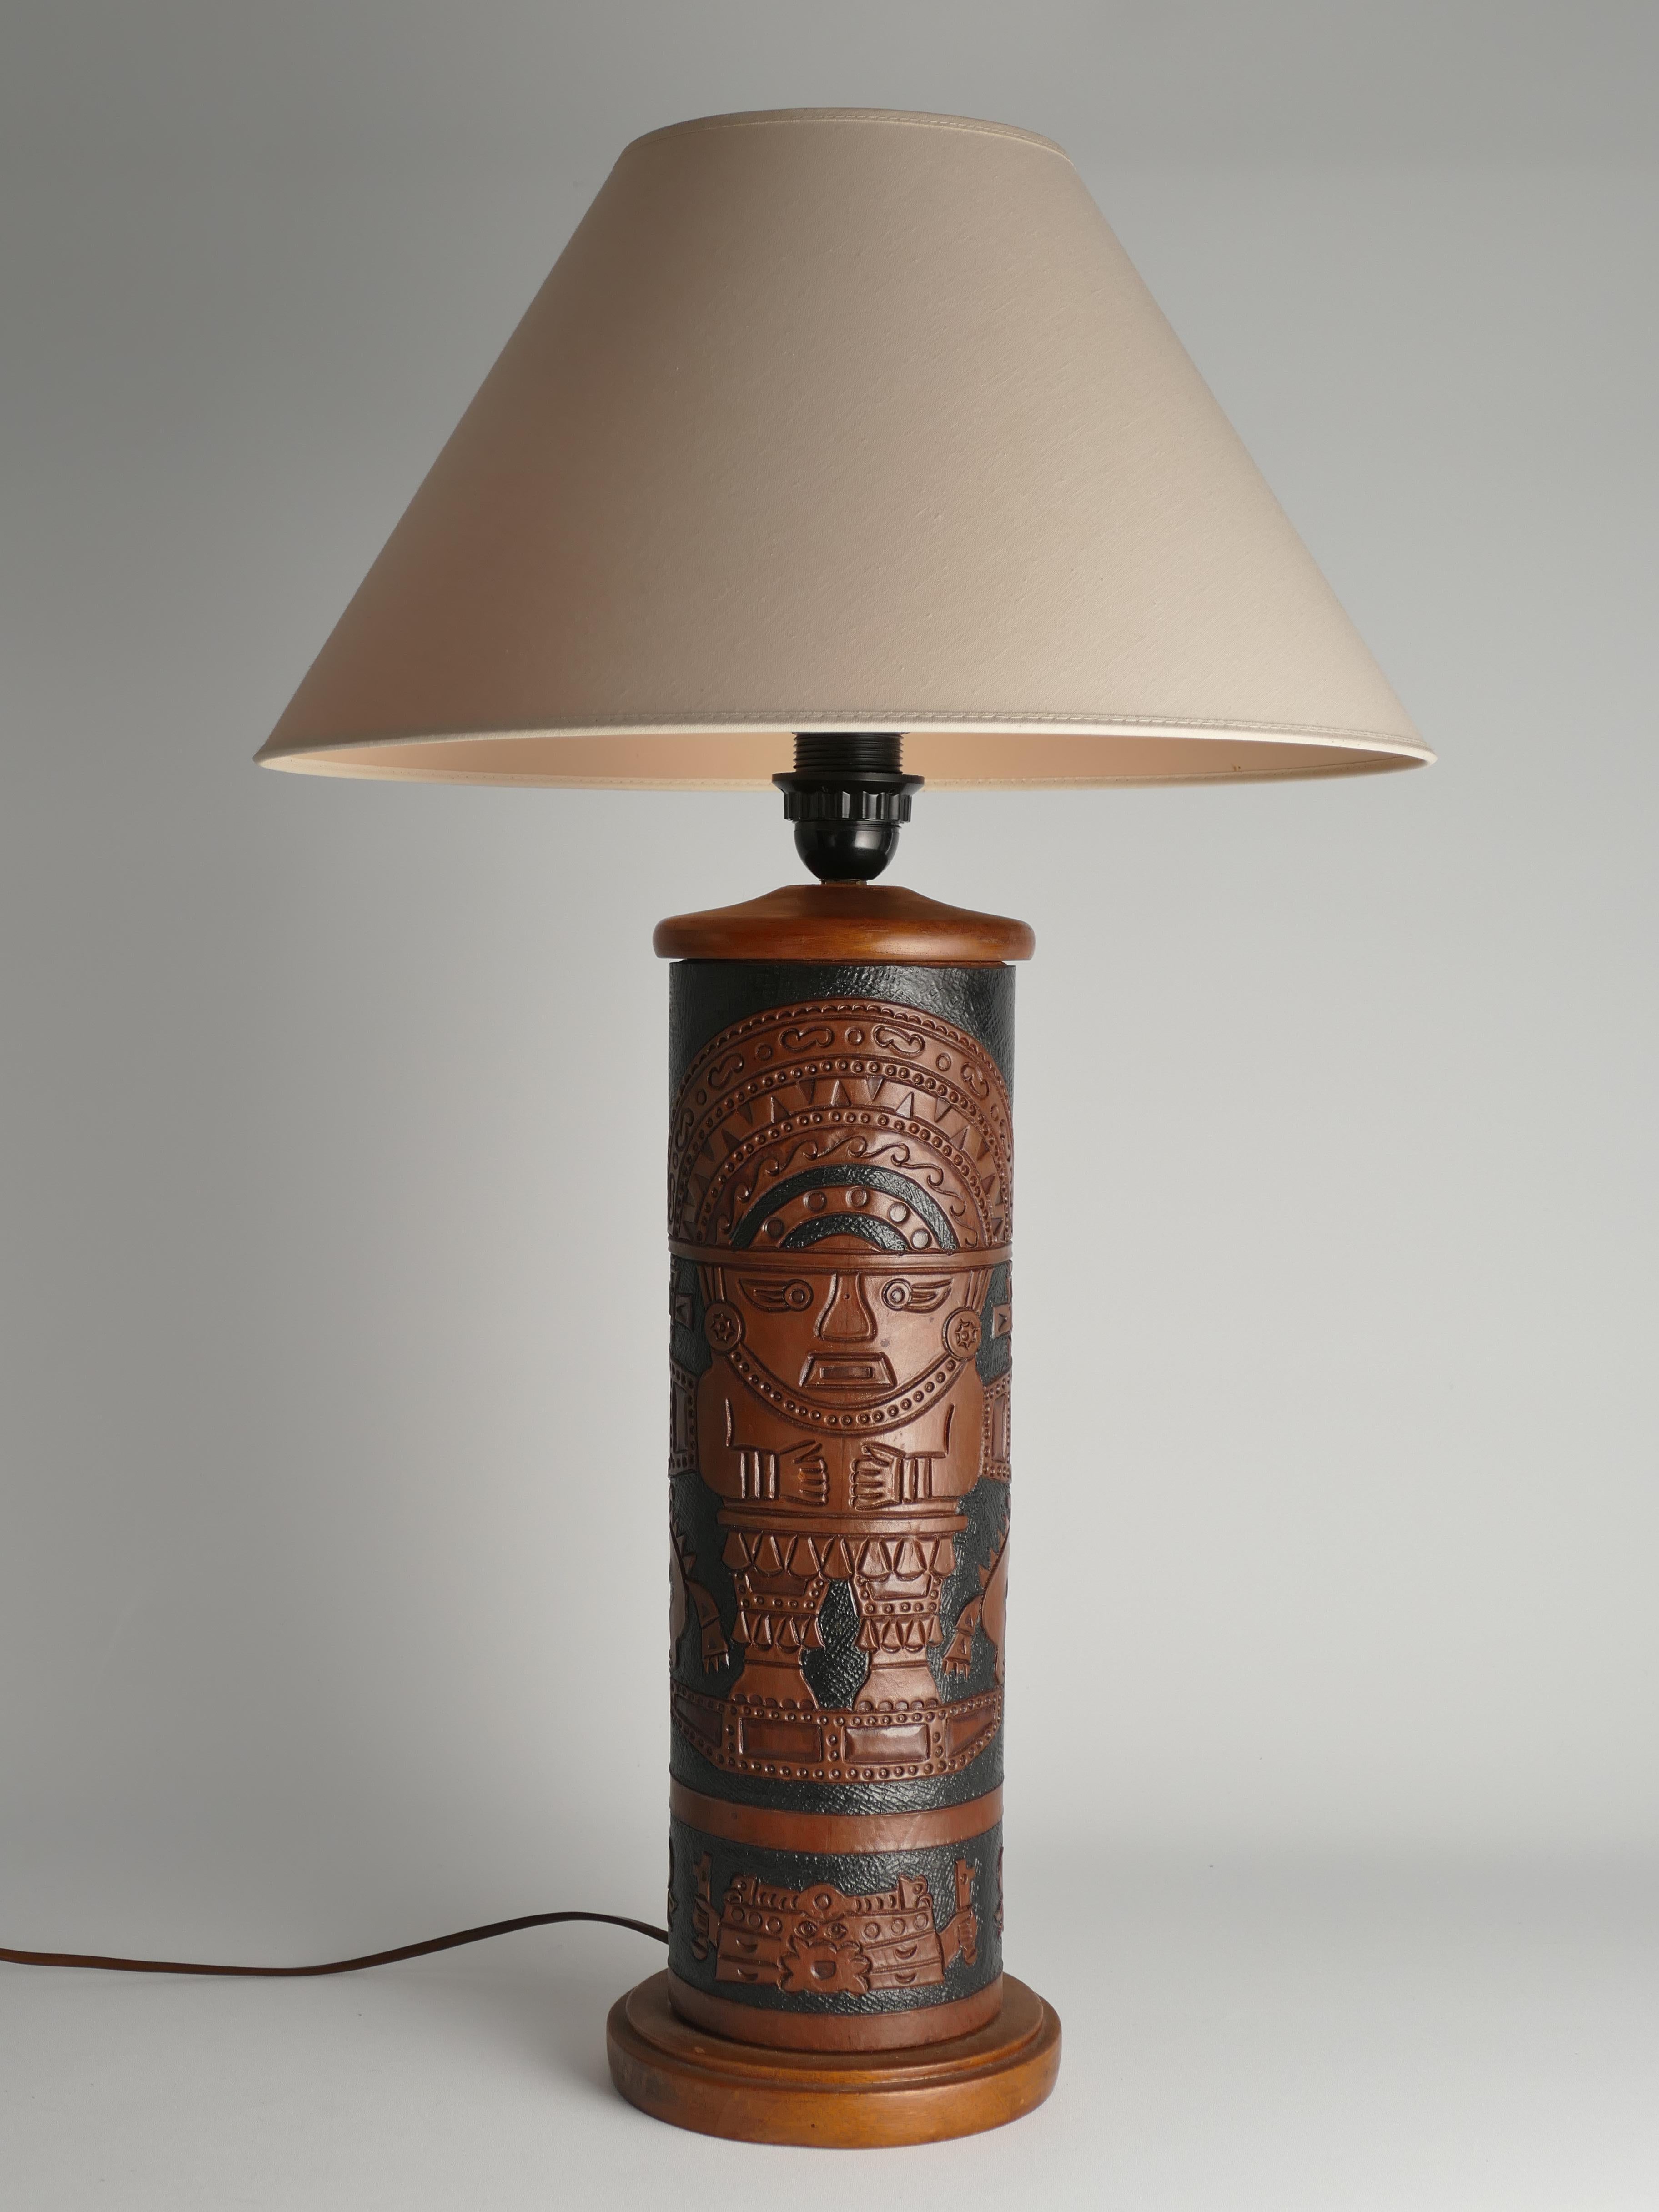 This table lamp showcases what appears to be a hand-tooled leather base with black and brown Aztec mural design. The lamp's base, both at the bottom and top, appears to be crafted from walnut.

DIMENSIONS
Height (fixture not included): 38 cm.